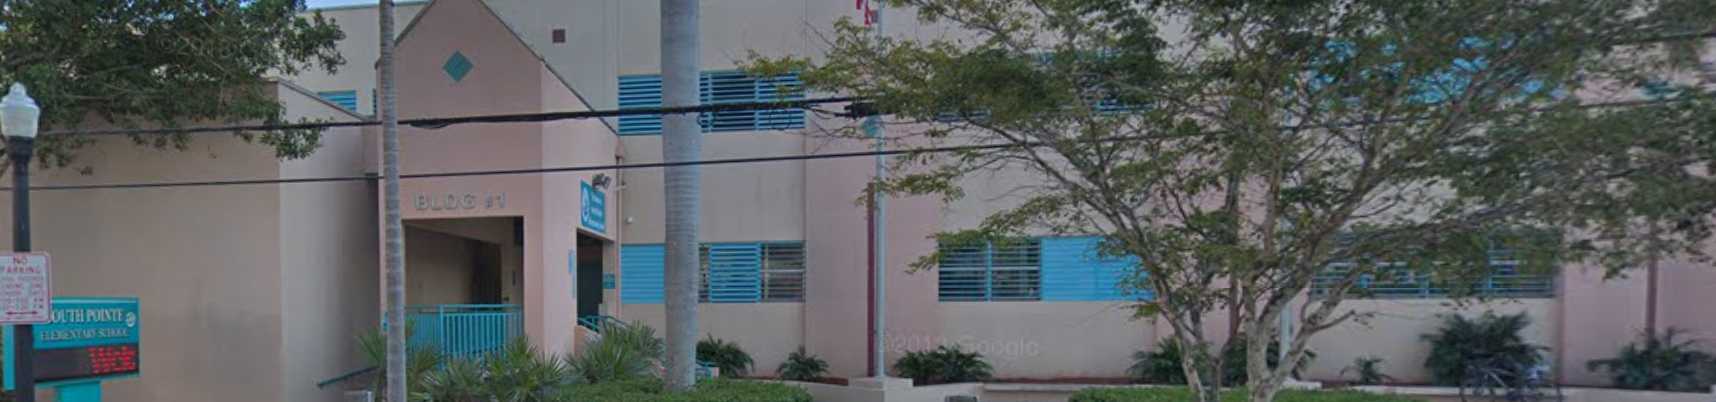 MDCPS-South Pointe Elementary HS